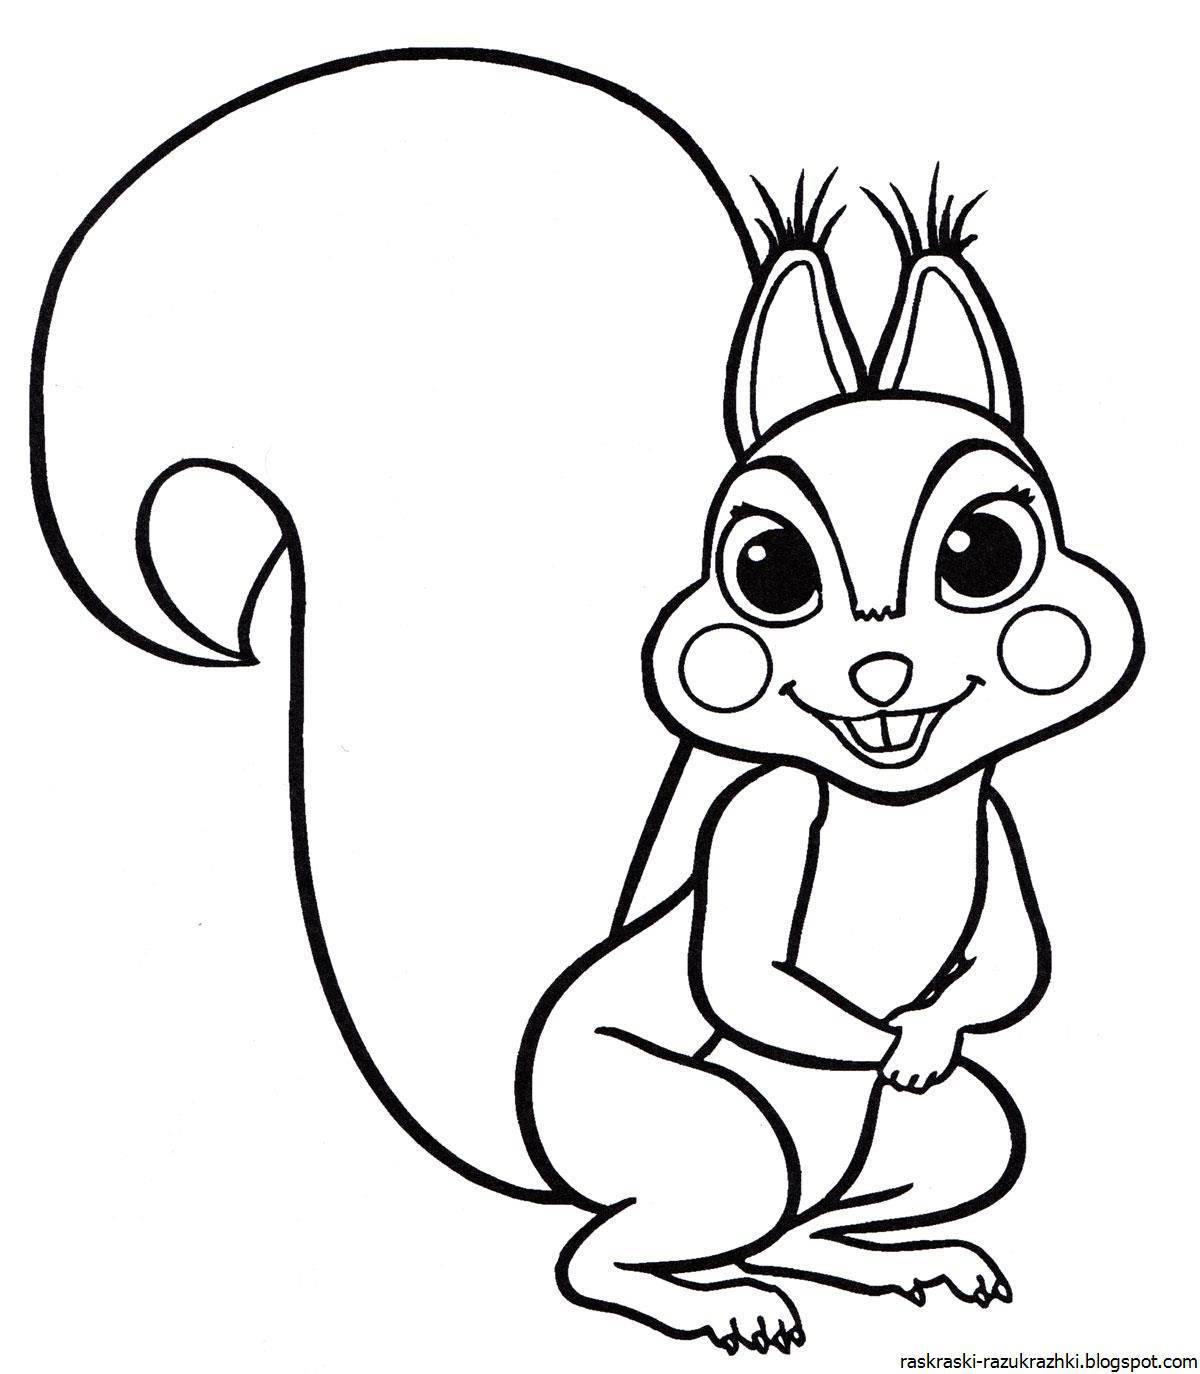 Inviting squirrel coloring book for kids